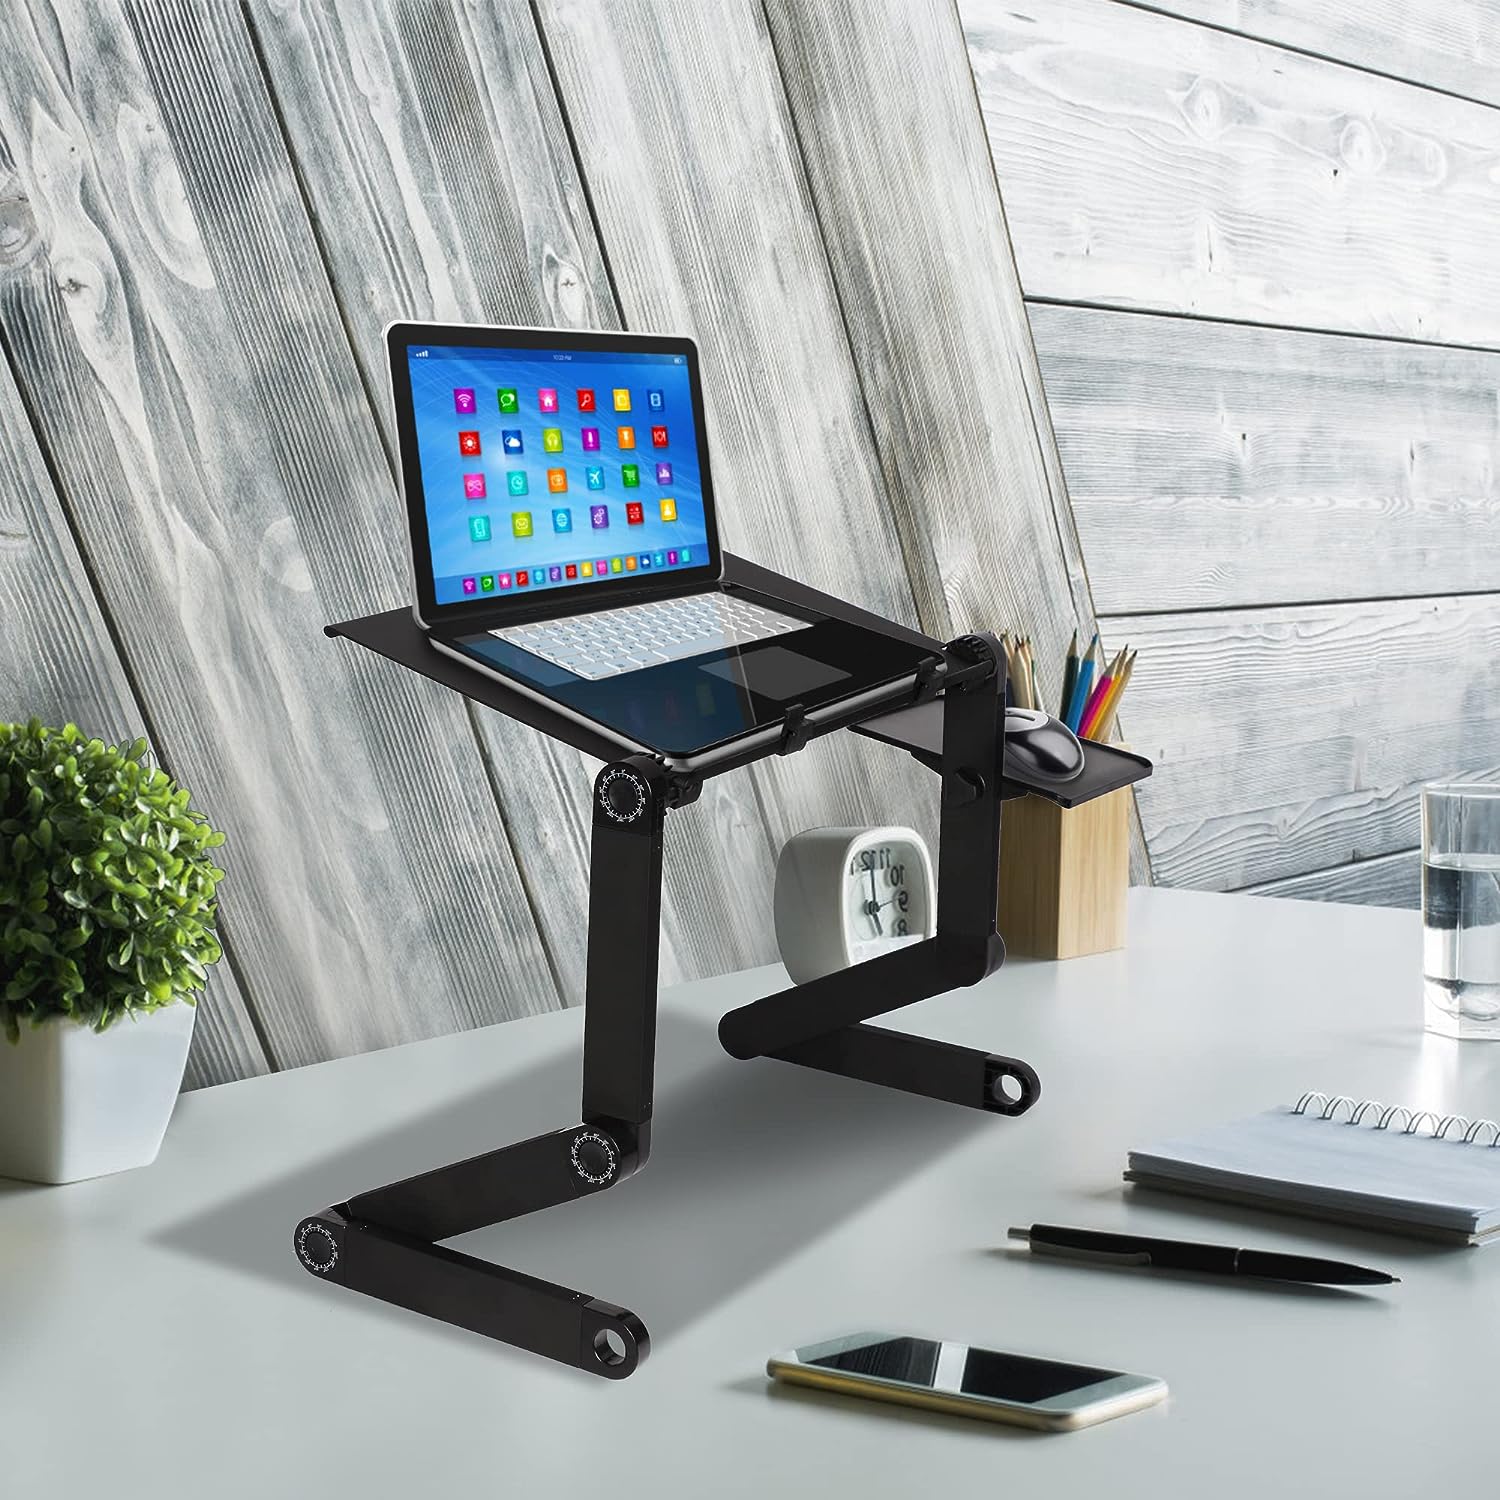 Foldable Adjustable Portable Laptop Table Stand Ergonomic Desk with Mouse Pad